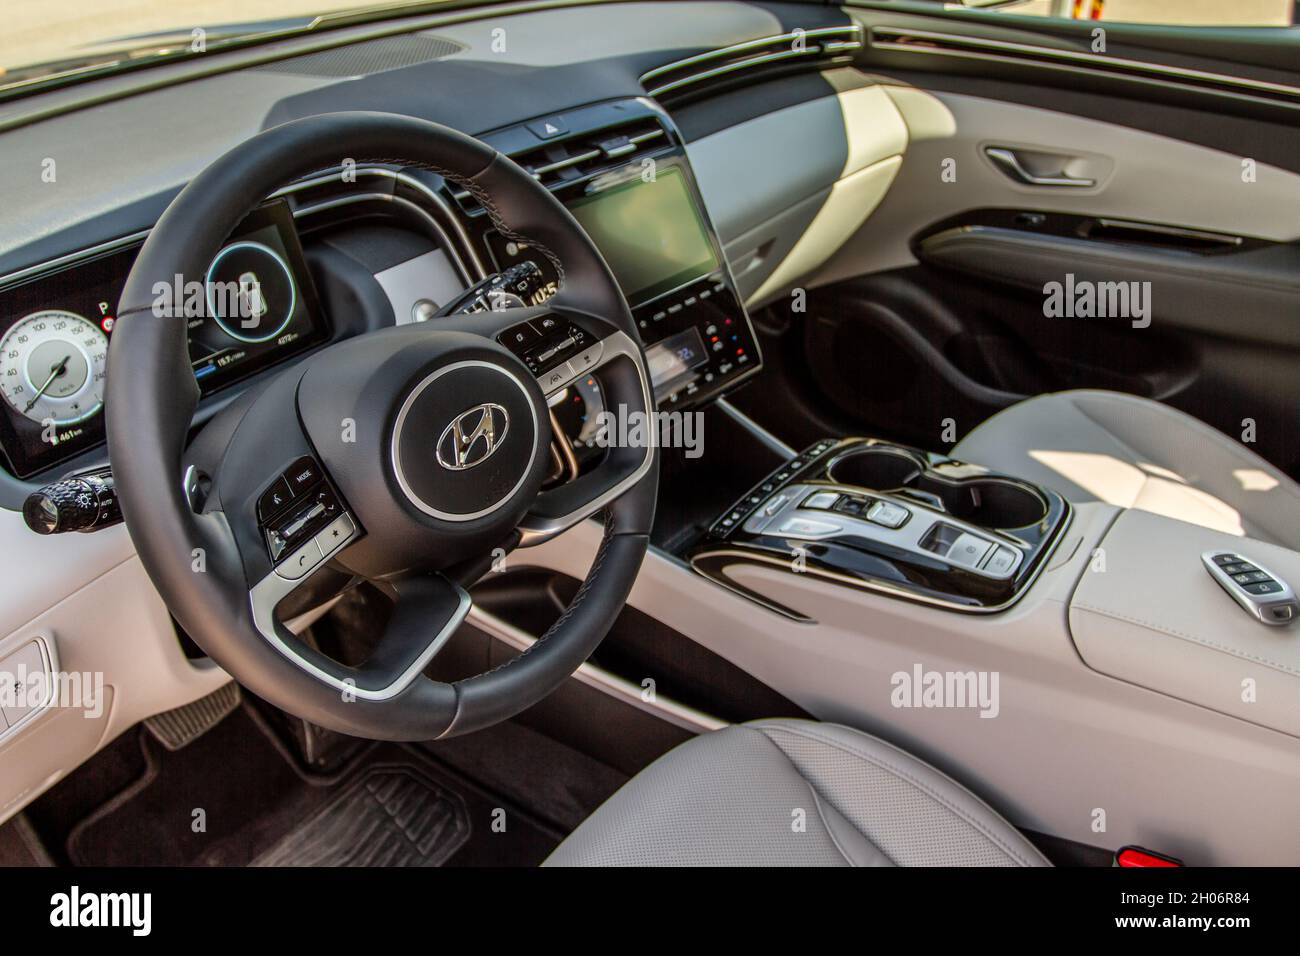 https://c8.alamy.com/comp/2H06R84/moscow-russia-august-27-2021-hyundai-tucson-fourth-generation-nx4-interior-view-hcompact-crossover-suv-interior-detail-close-up-view-2H06R84.jpg